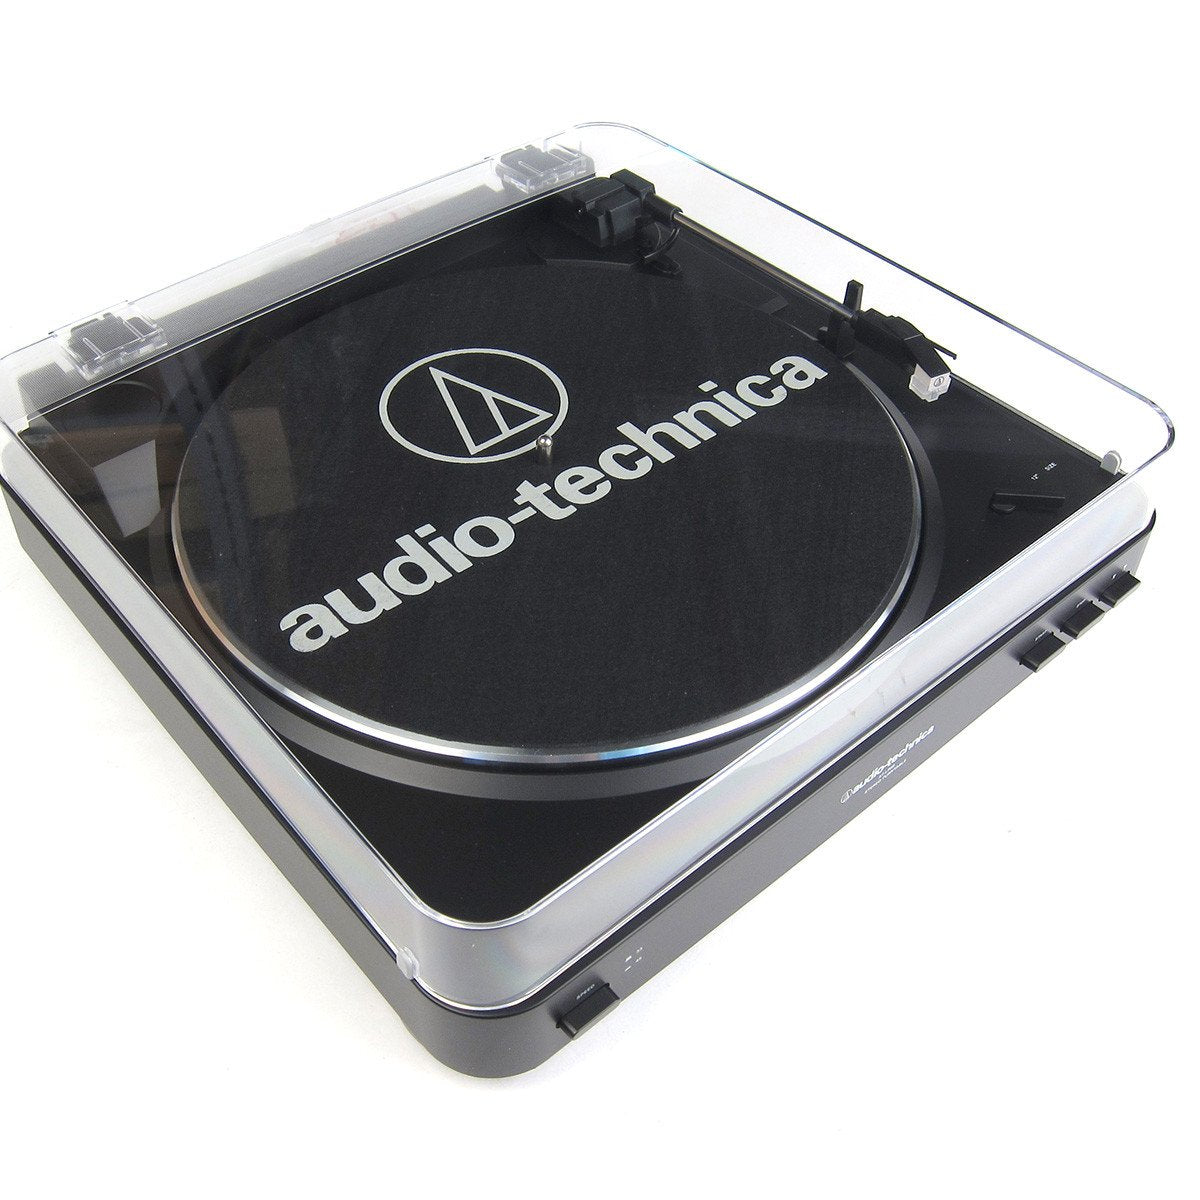 Audio-Technica: AT-LP60BK Automatic Turntable - Dustcover